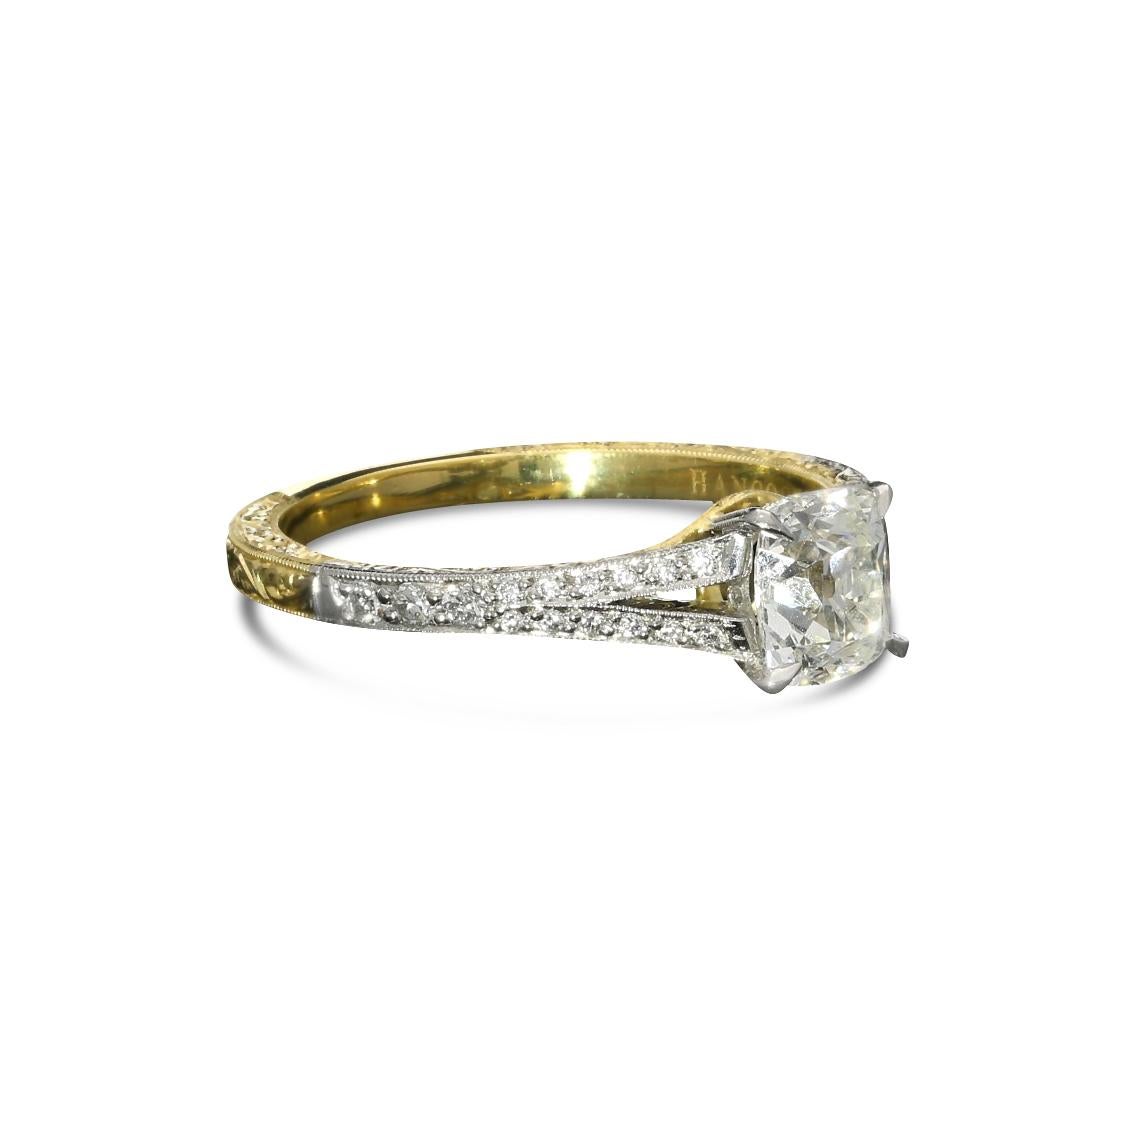 An elegant old cut diamond, platinum and 18ct yellow gold ring by Hancocks, centred with a beautiful cushion shaped old mine brilliant cut diamond weighing 0.95cts and of K colour and VS1 clarity, claw set in platinum between split tapering